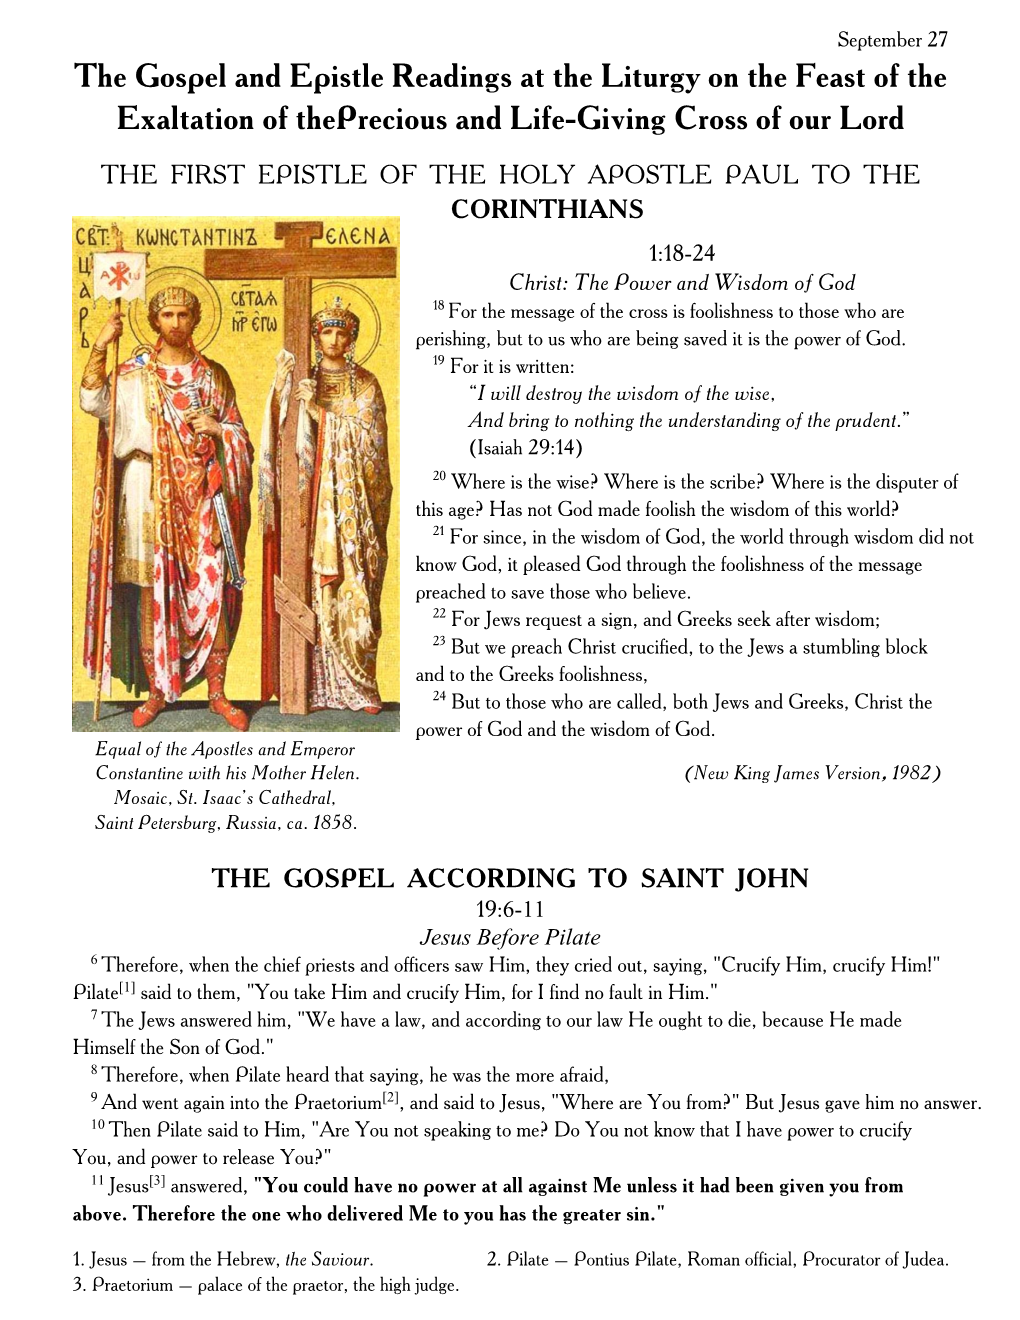 The Gospel and Epistle Readings at the Liturgy on the Feast of the Exaltation of Theprecious and Life-Giving Cross of Our Lord